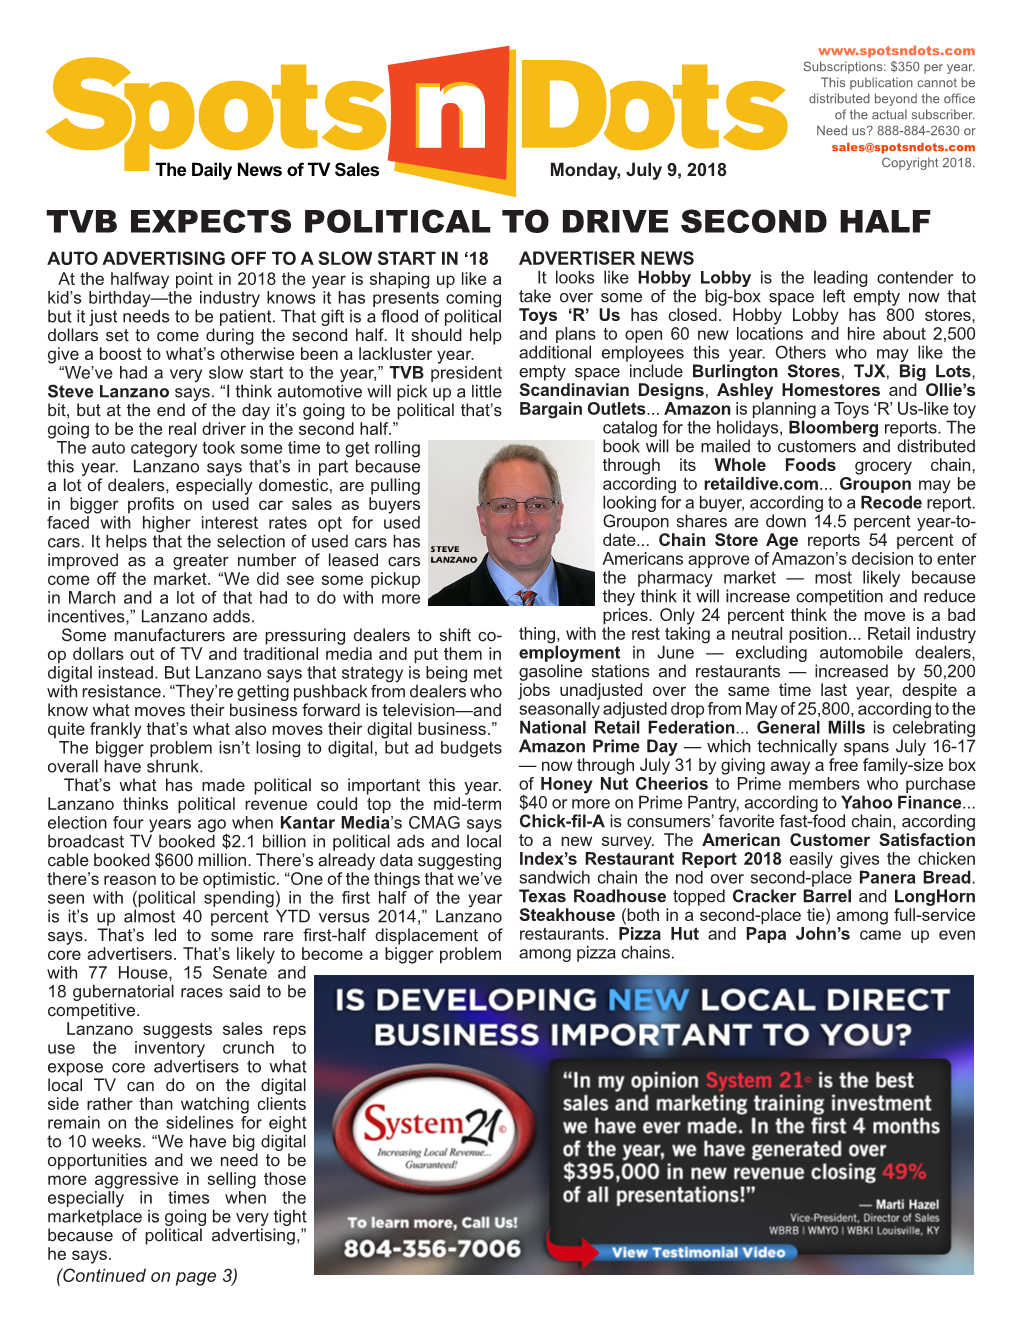 Tvb Expects Political to Drive Second Half